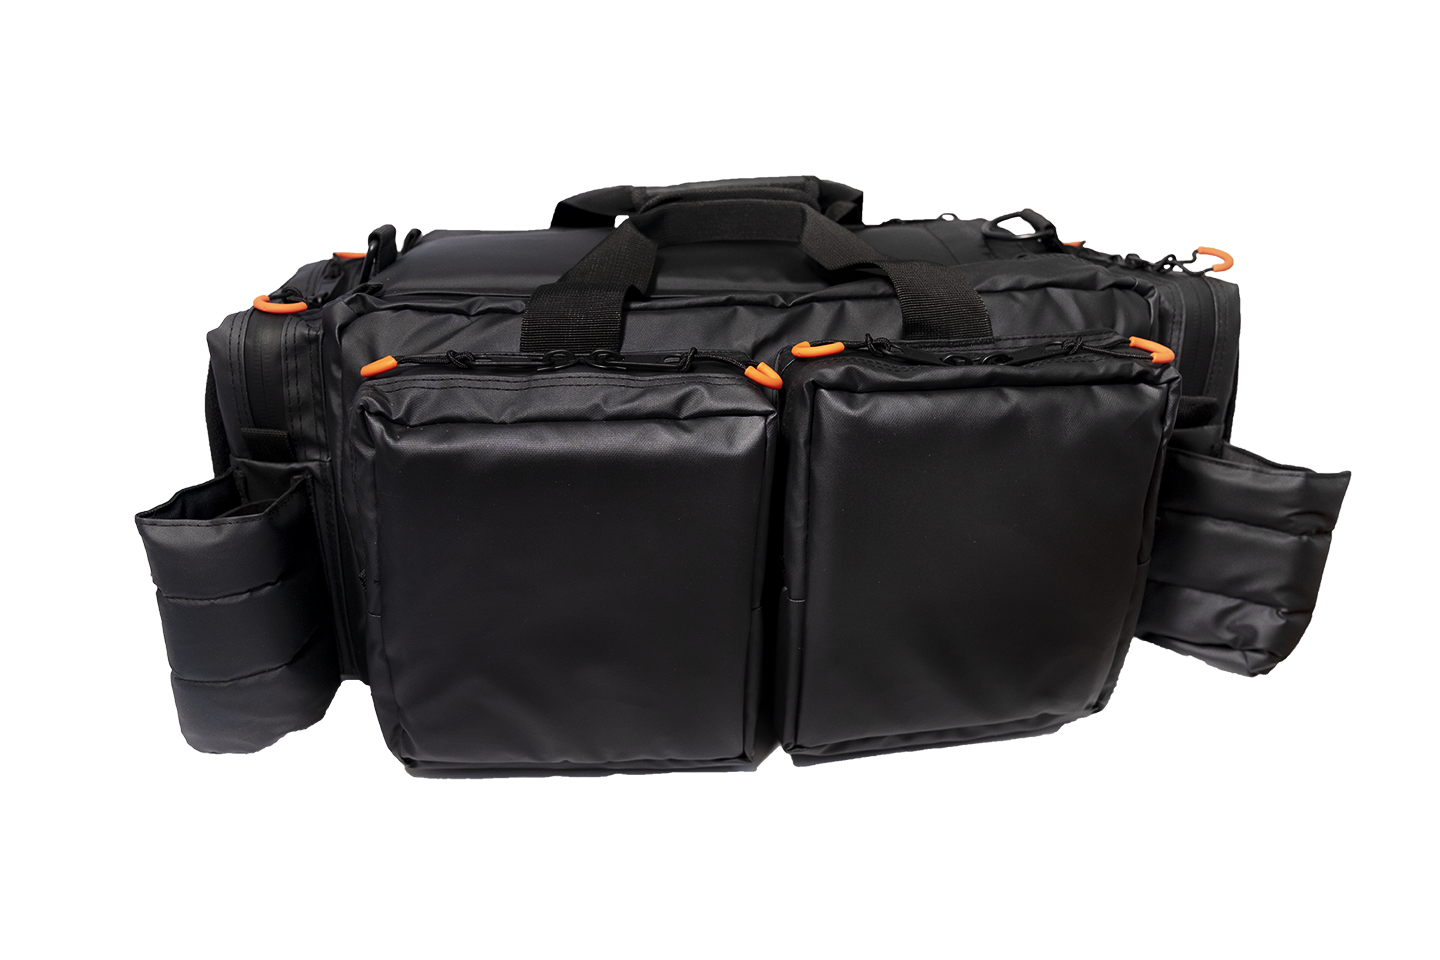 MAXTRAX Recovery Kit Bag  Recovery Gear Storage MAXTRAX- Adventure Imports